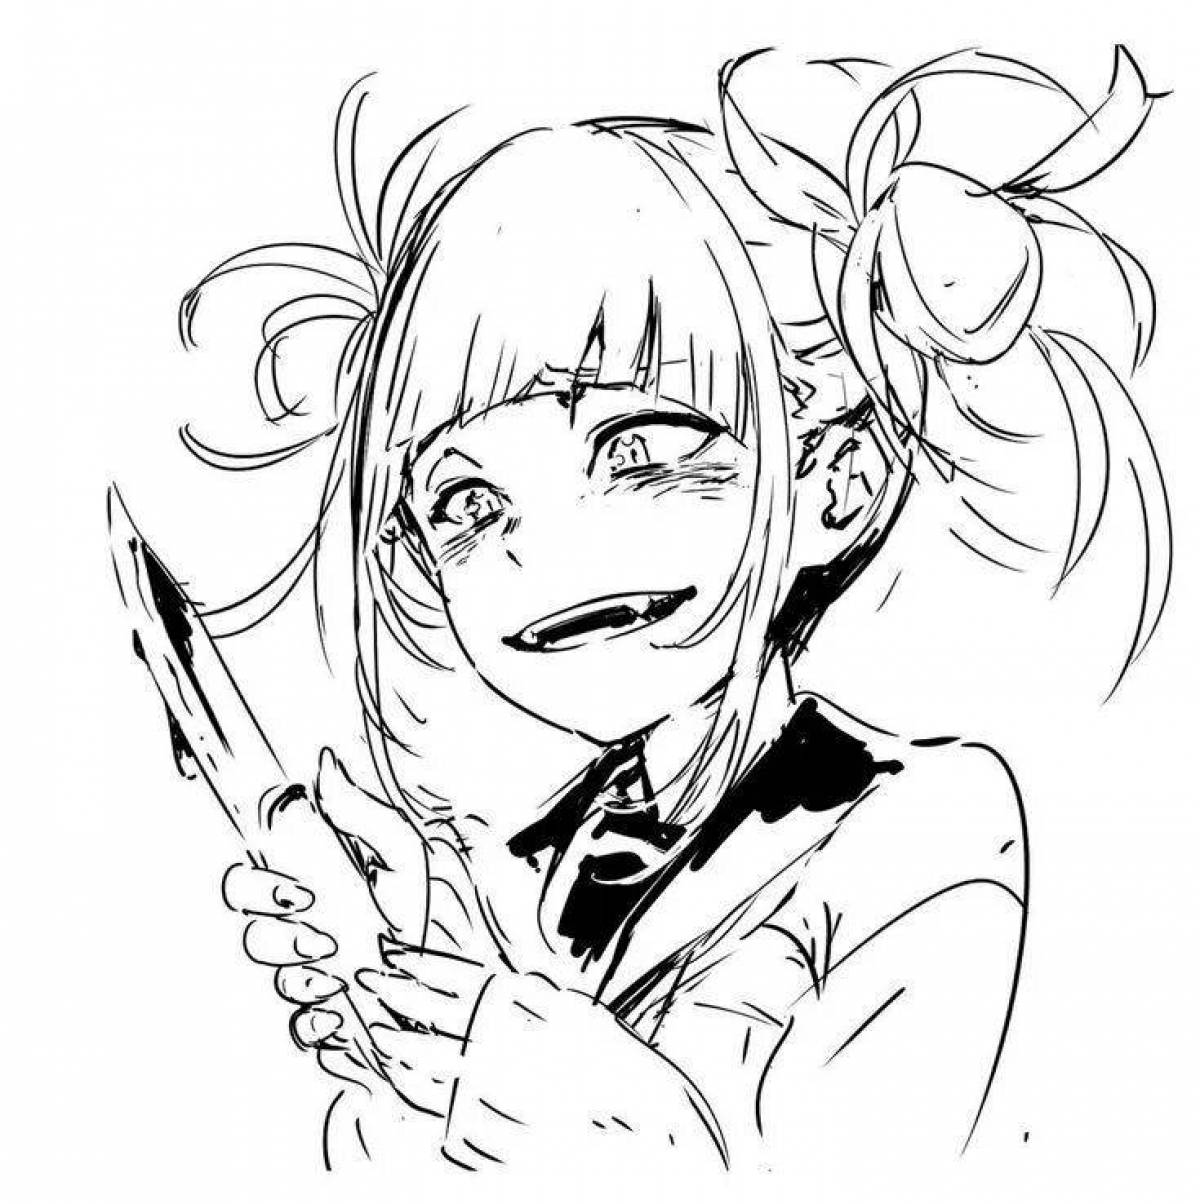 Amazing toga himiko coloring page